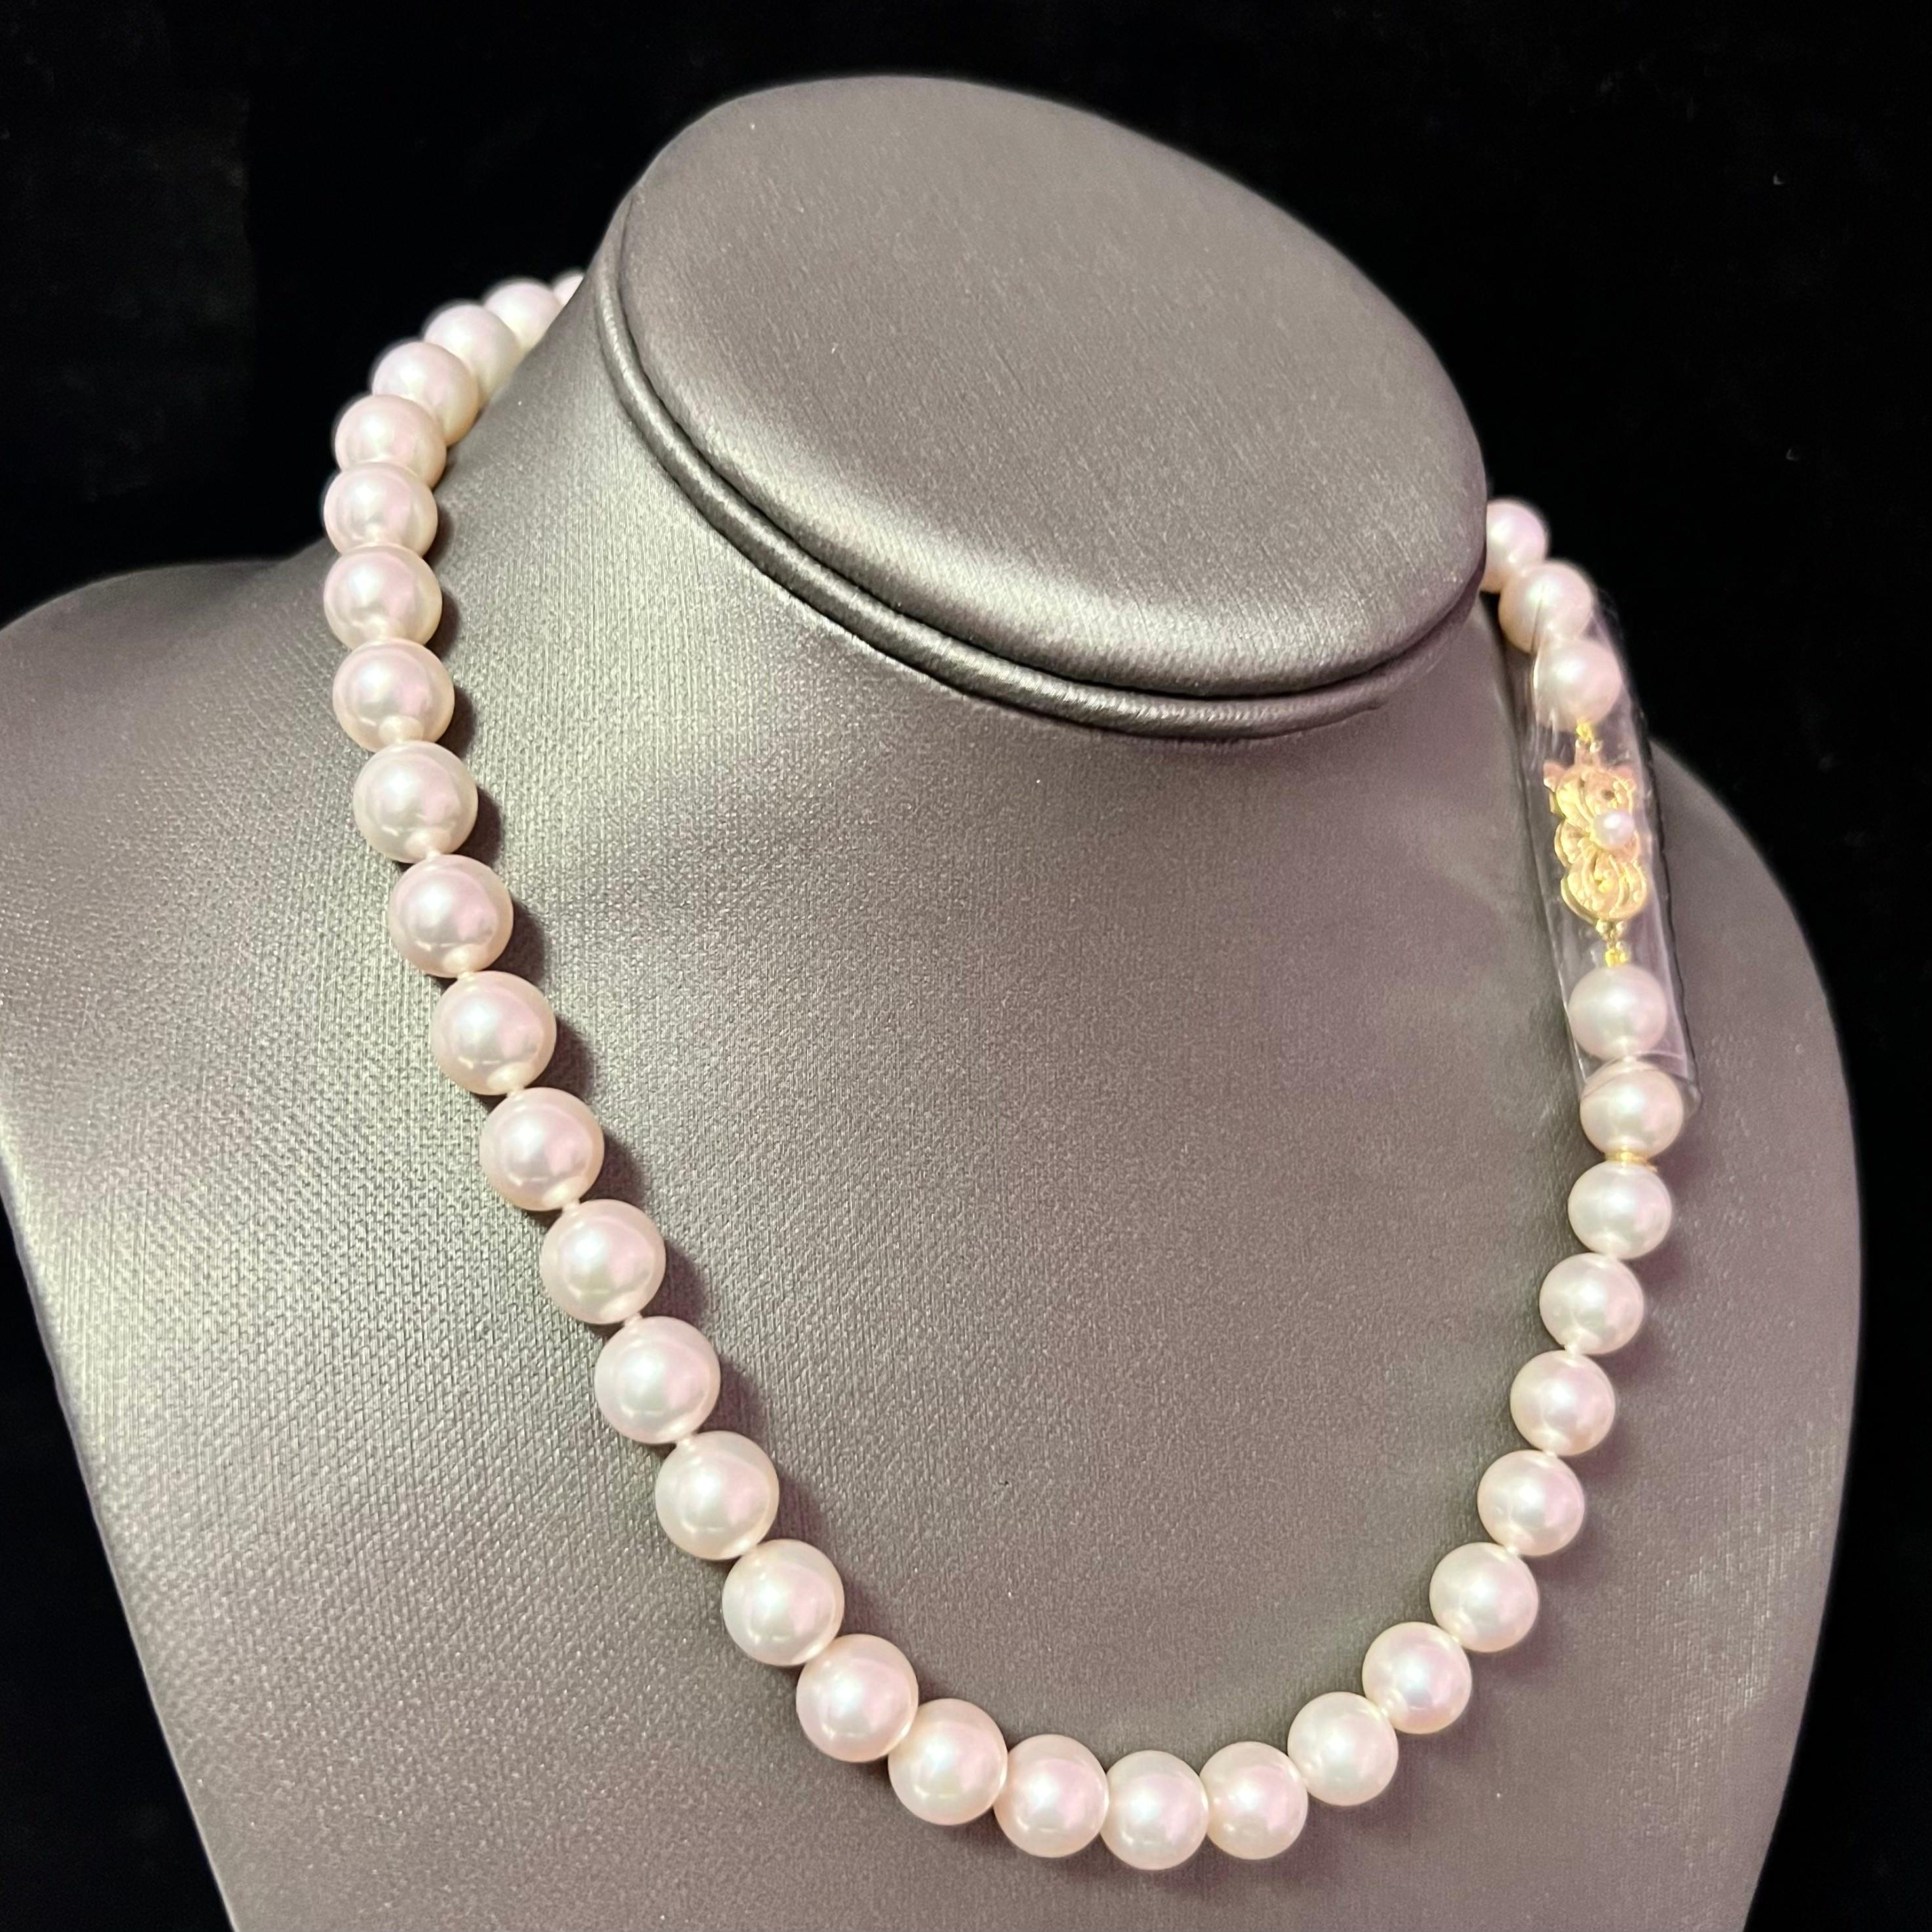 Certified and Appraised by Mikimoto in New York for the amount of $35,435

Estate Mikimoto 44 Pearls LARGE 9.5 mm 17.5 Inches 18 KT Yellow Gold Clasp

TRUSTED SELLER SINCE 2002

PLEASE REVIEW OUR 100% POSITIVE FEEDBACKS FROM OUR HAPPY